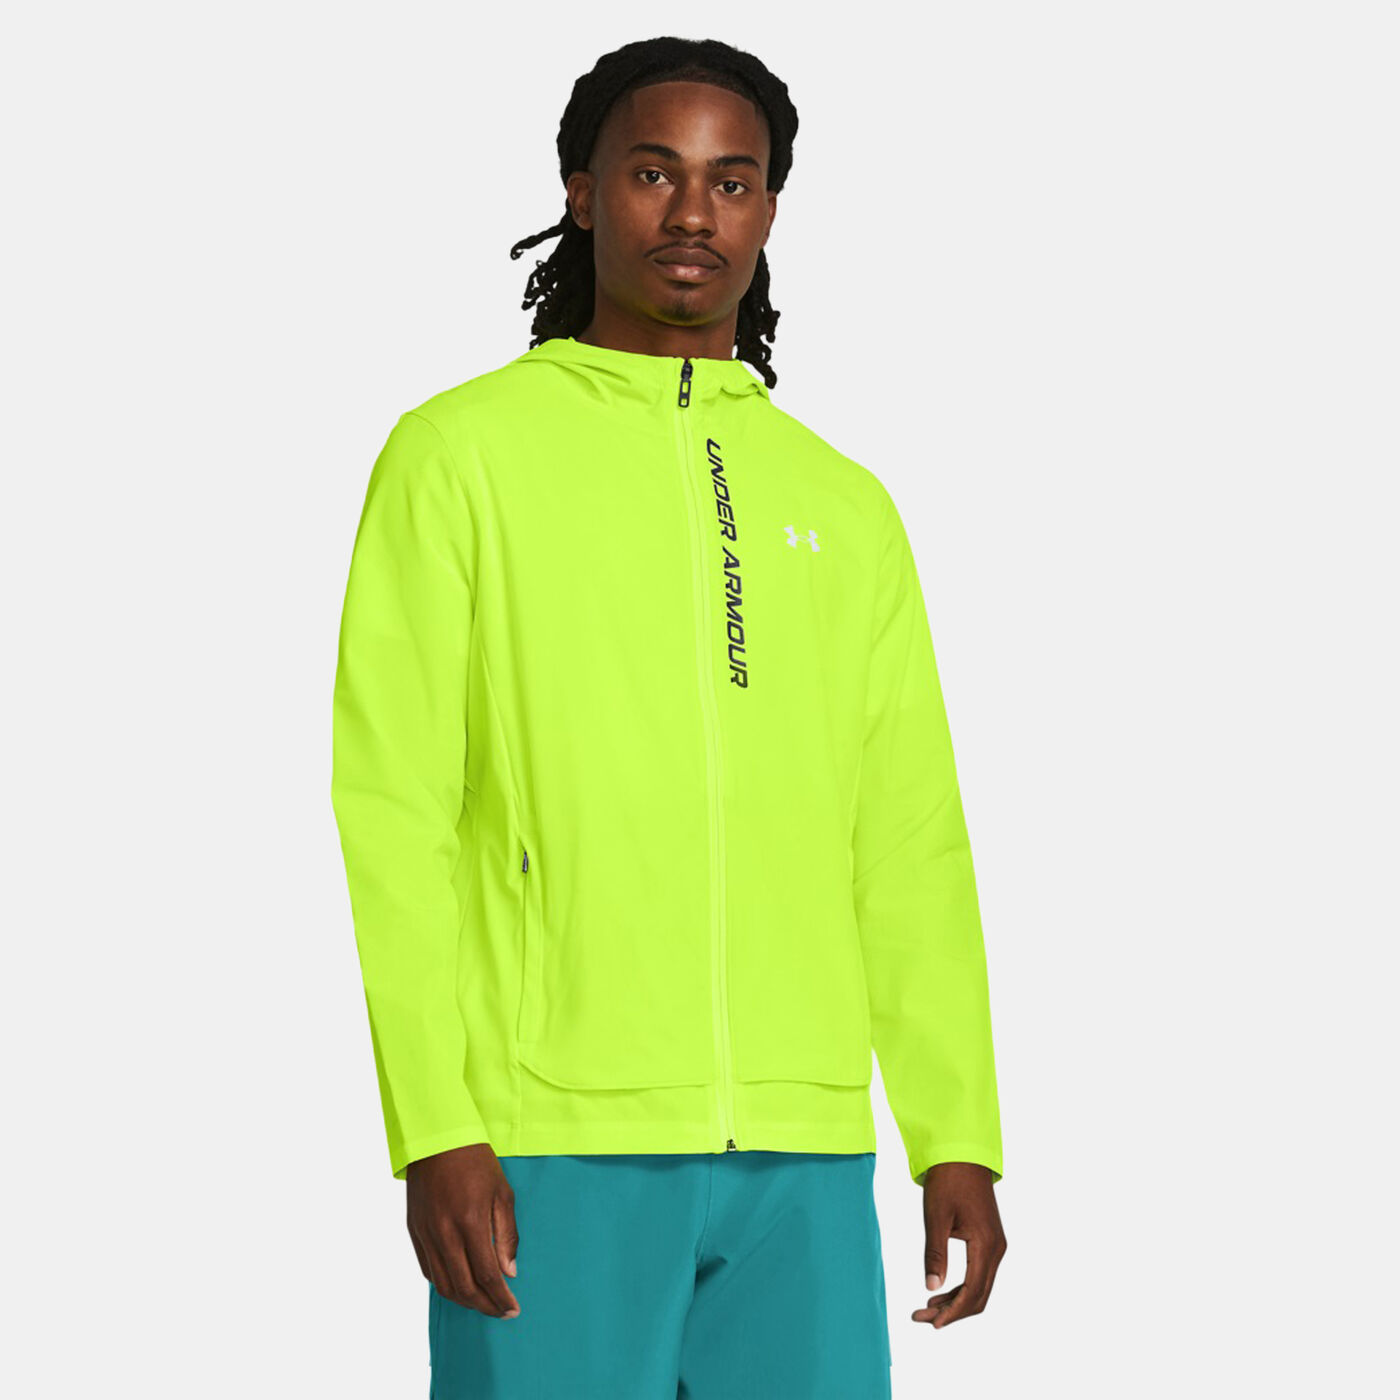 Men's OutRun The Storm Running Jacket